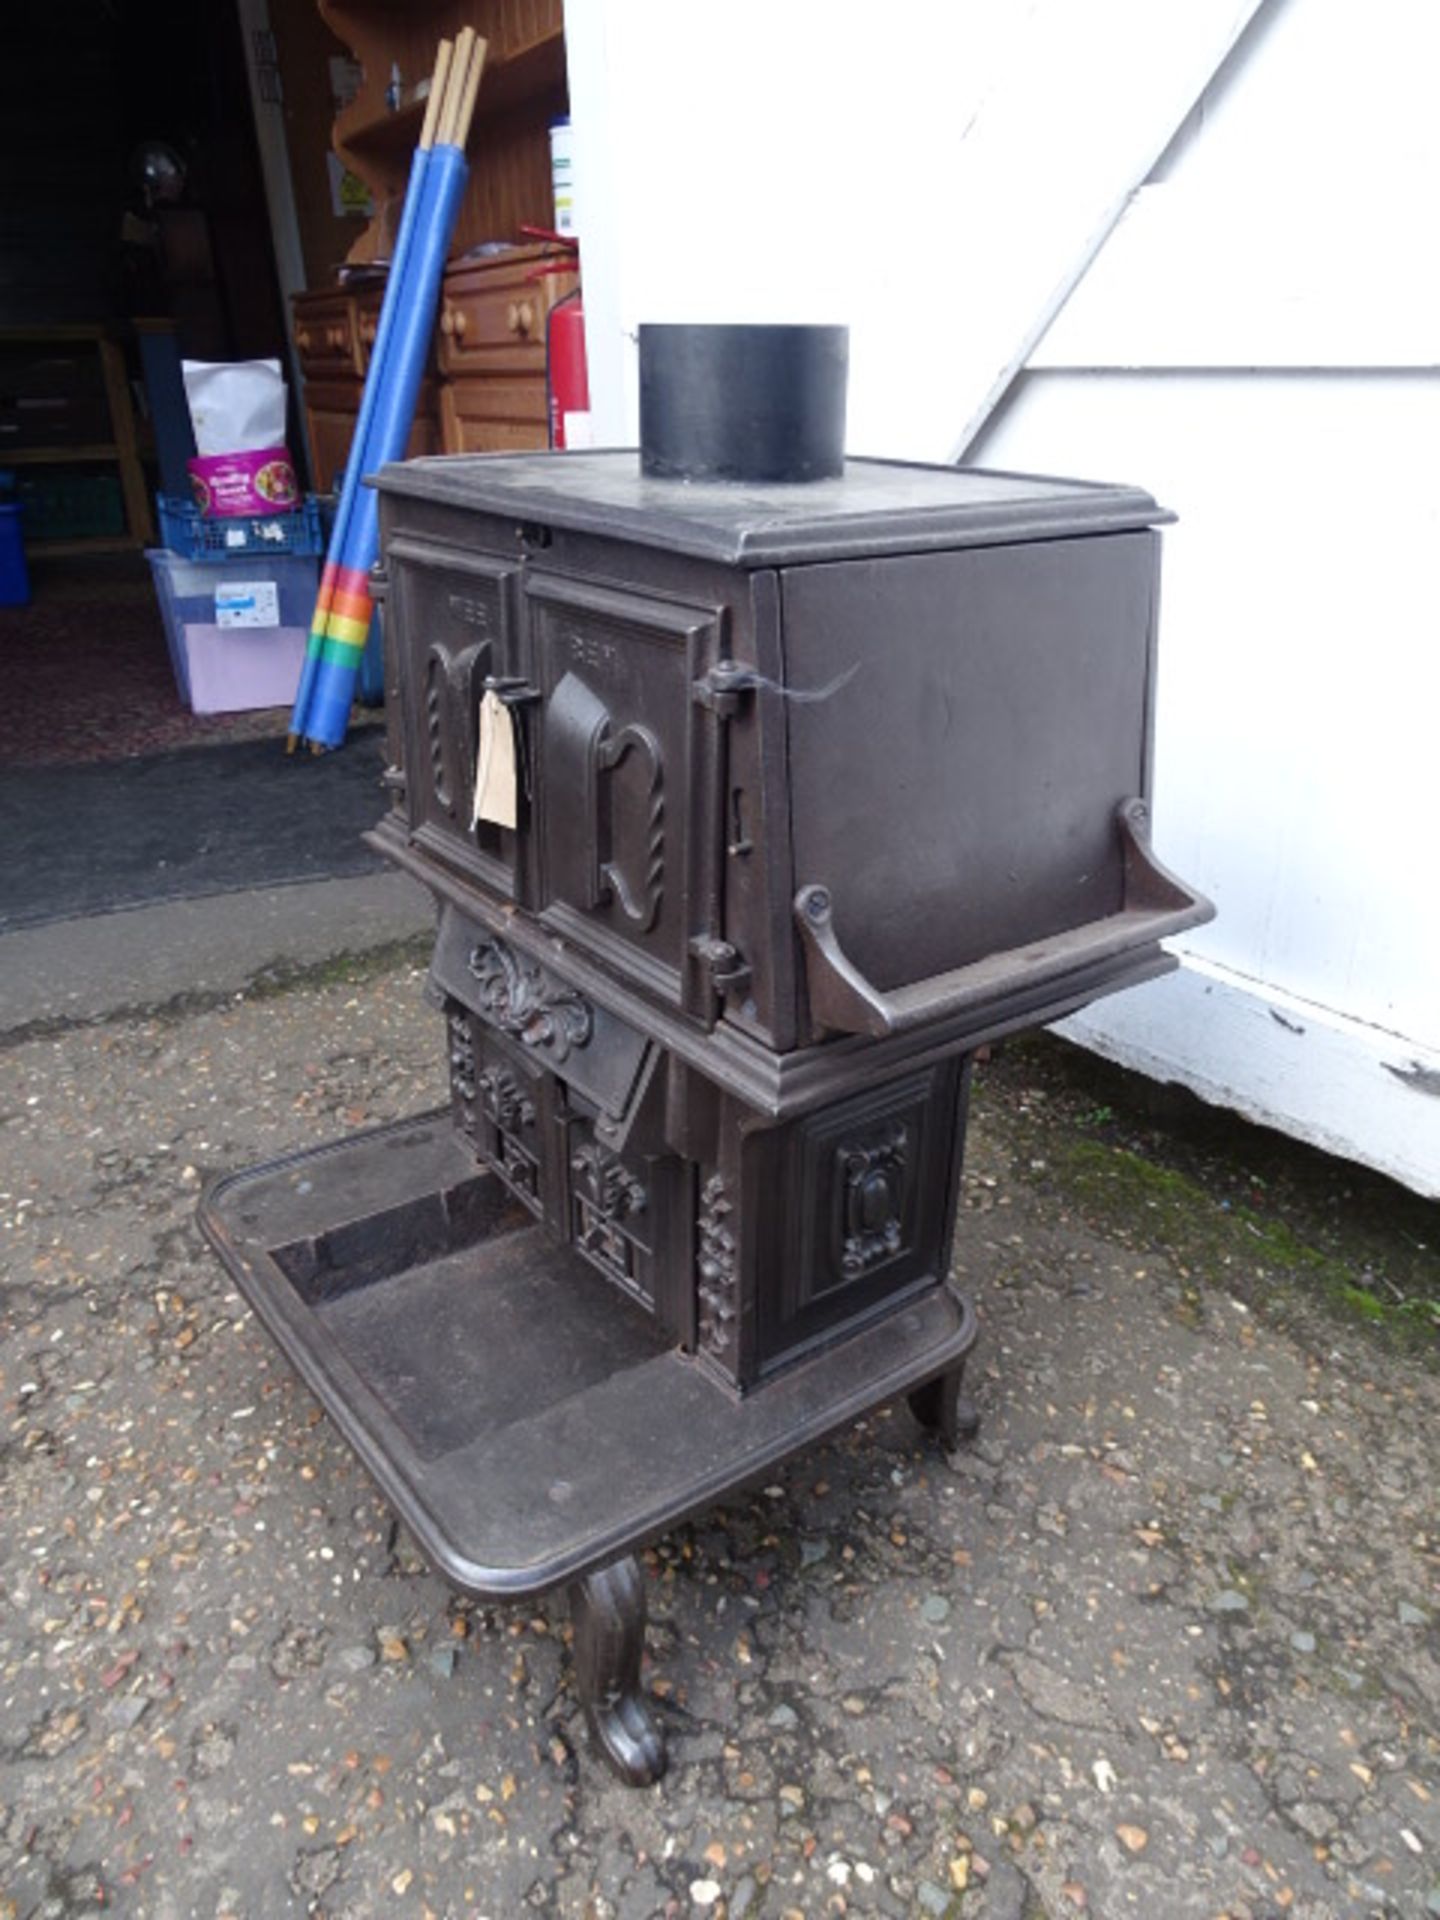 The Wee Ben tailors cast iron laundry stove with ornate door decorations incl two tailor goose irons - Image 9 of 10